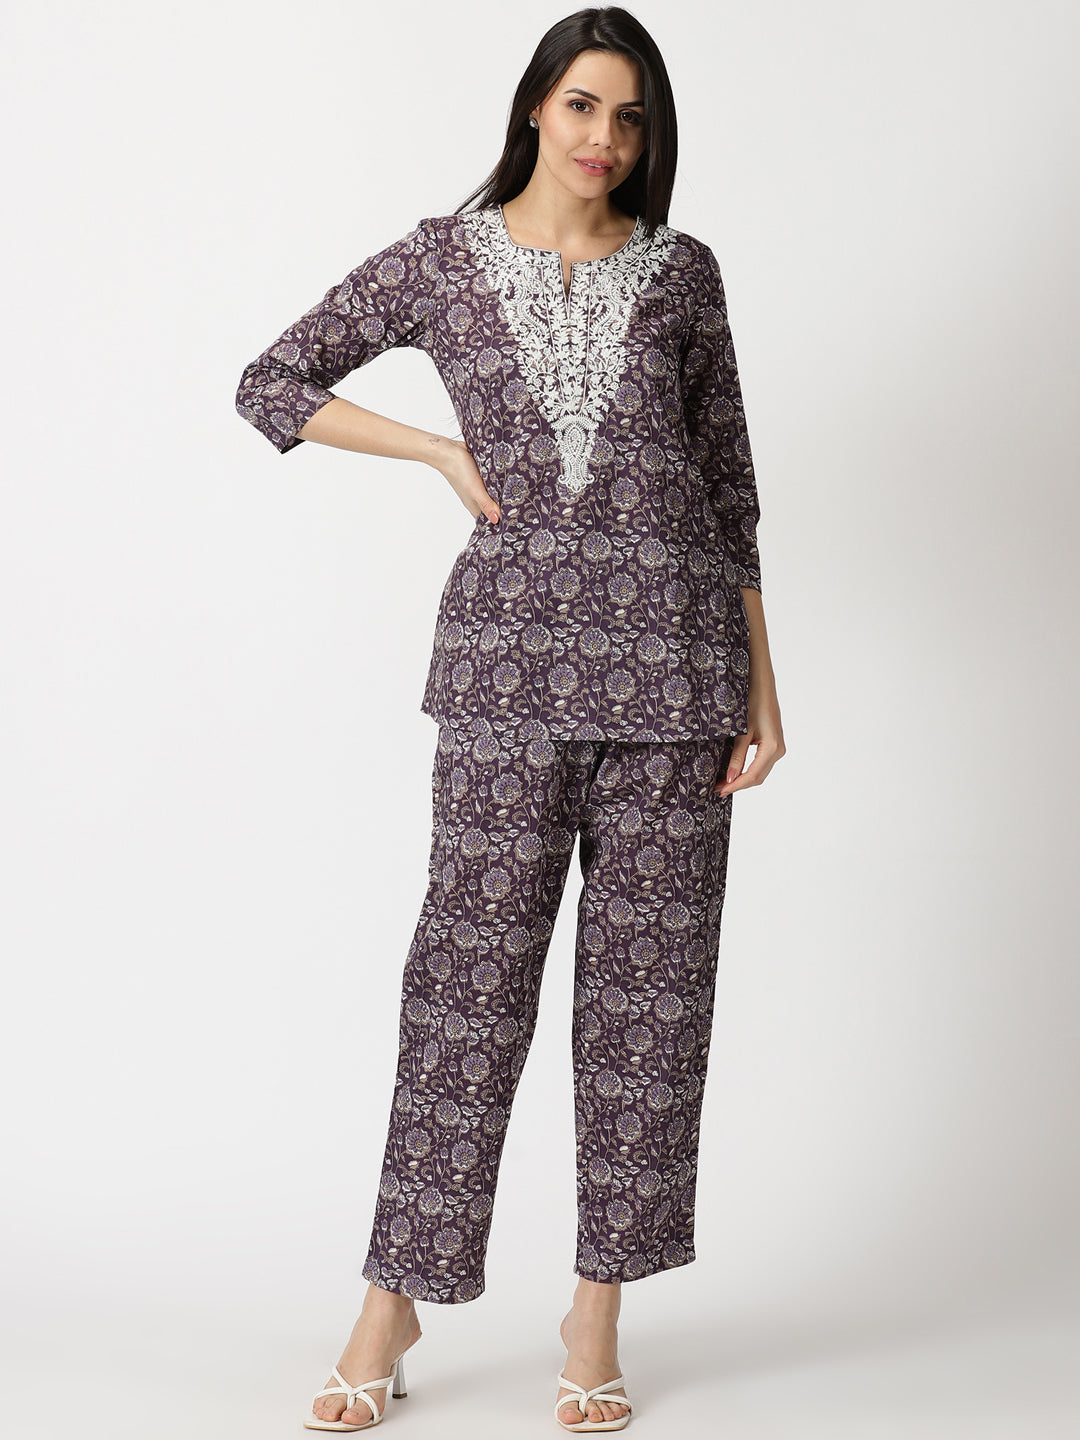 Purple Floral Print Cotton Co-ord Set with Chikankari Embroidered Yoke